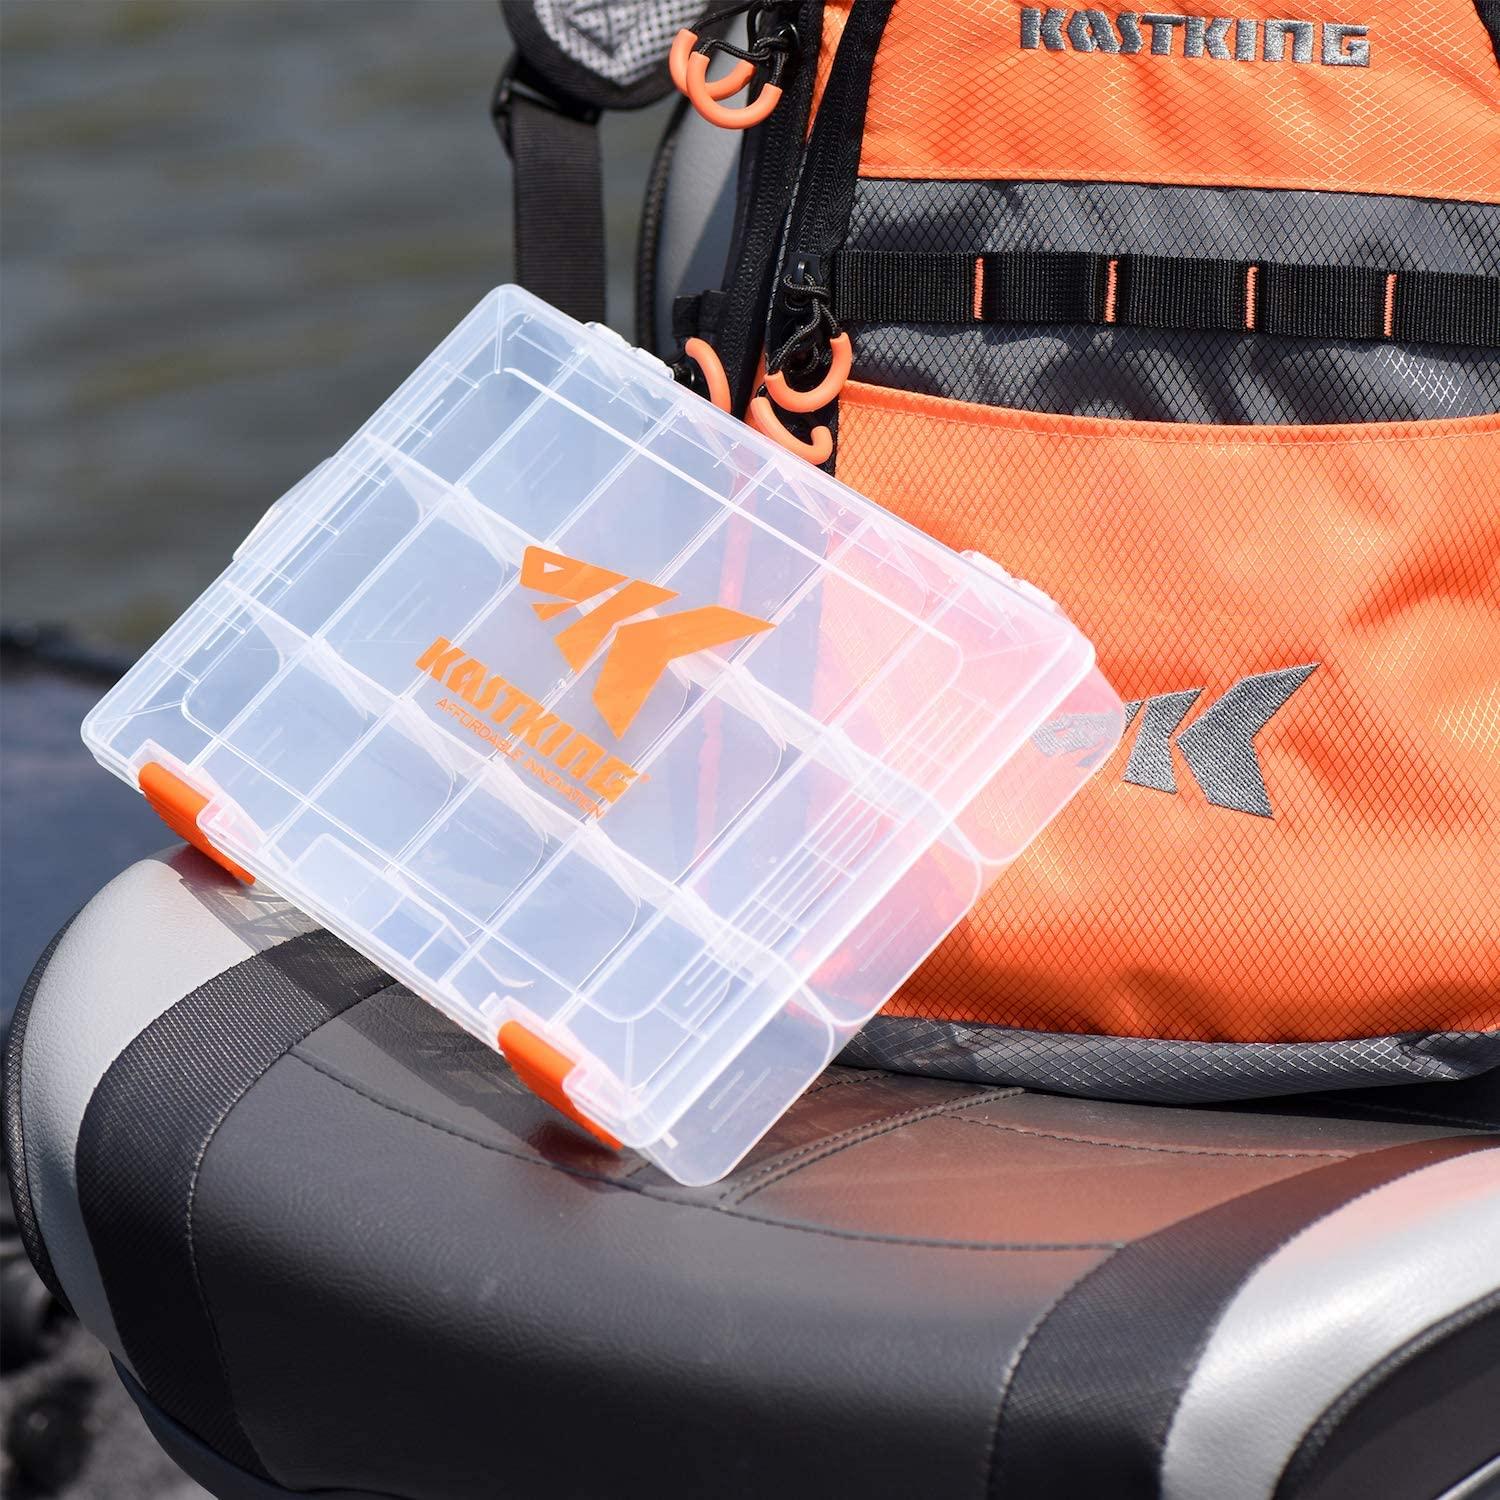 Fishing Tackle Box Storage Trays with Removable Dividers Fishing